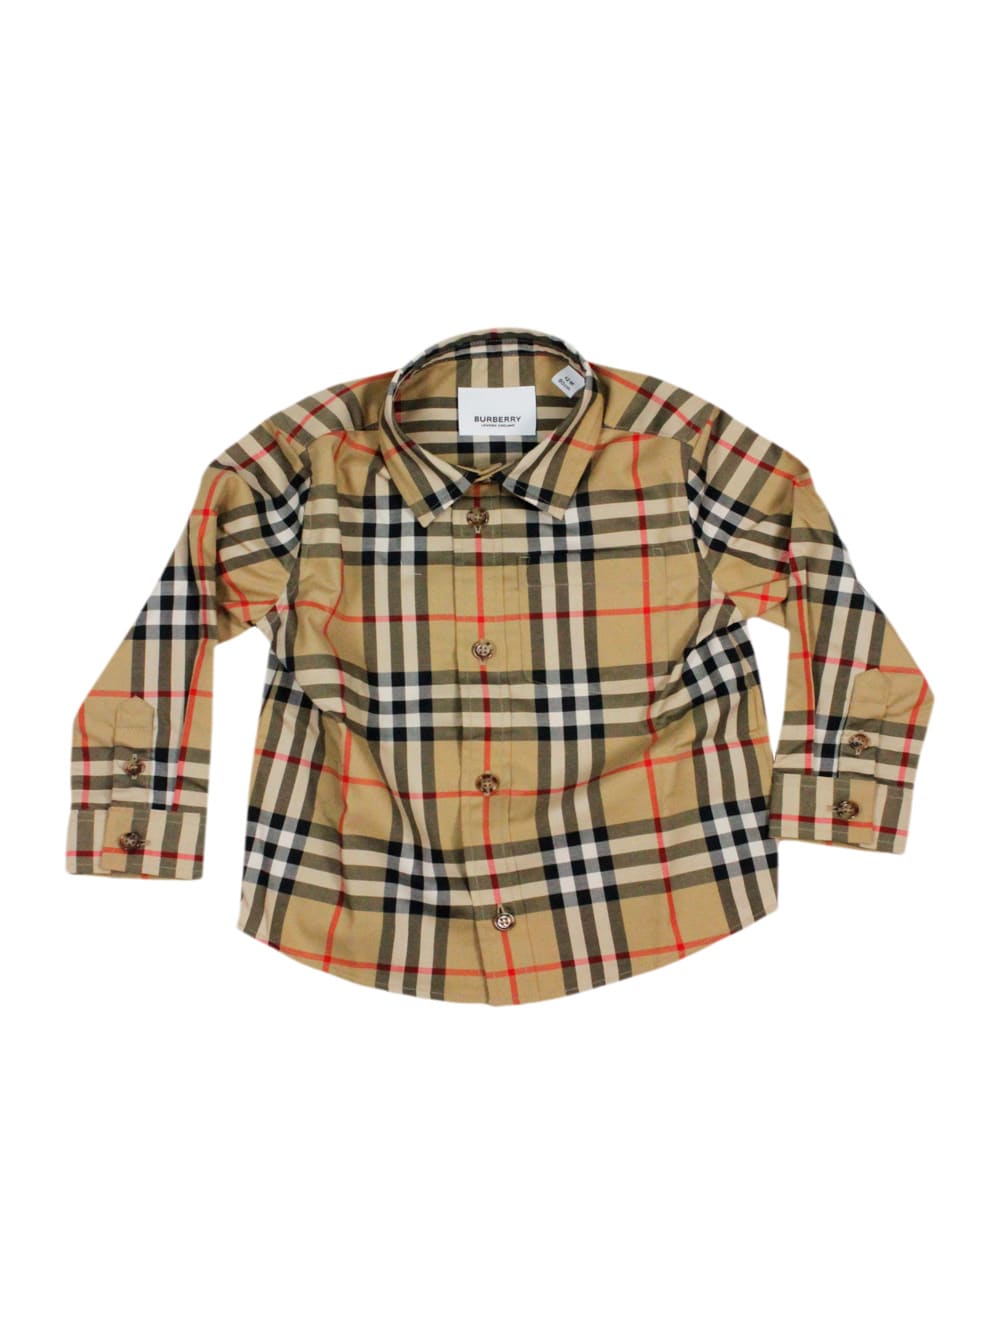 Burberry Kids' Stretch Cotton Twill Shirt With Patch Pocket On The Chest In A Vintage Check Pattern In Beige